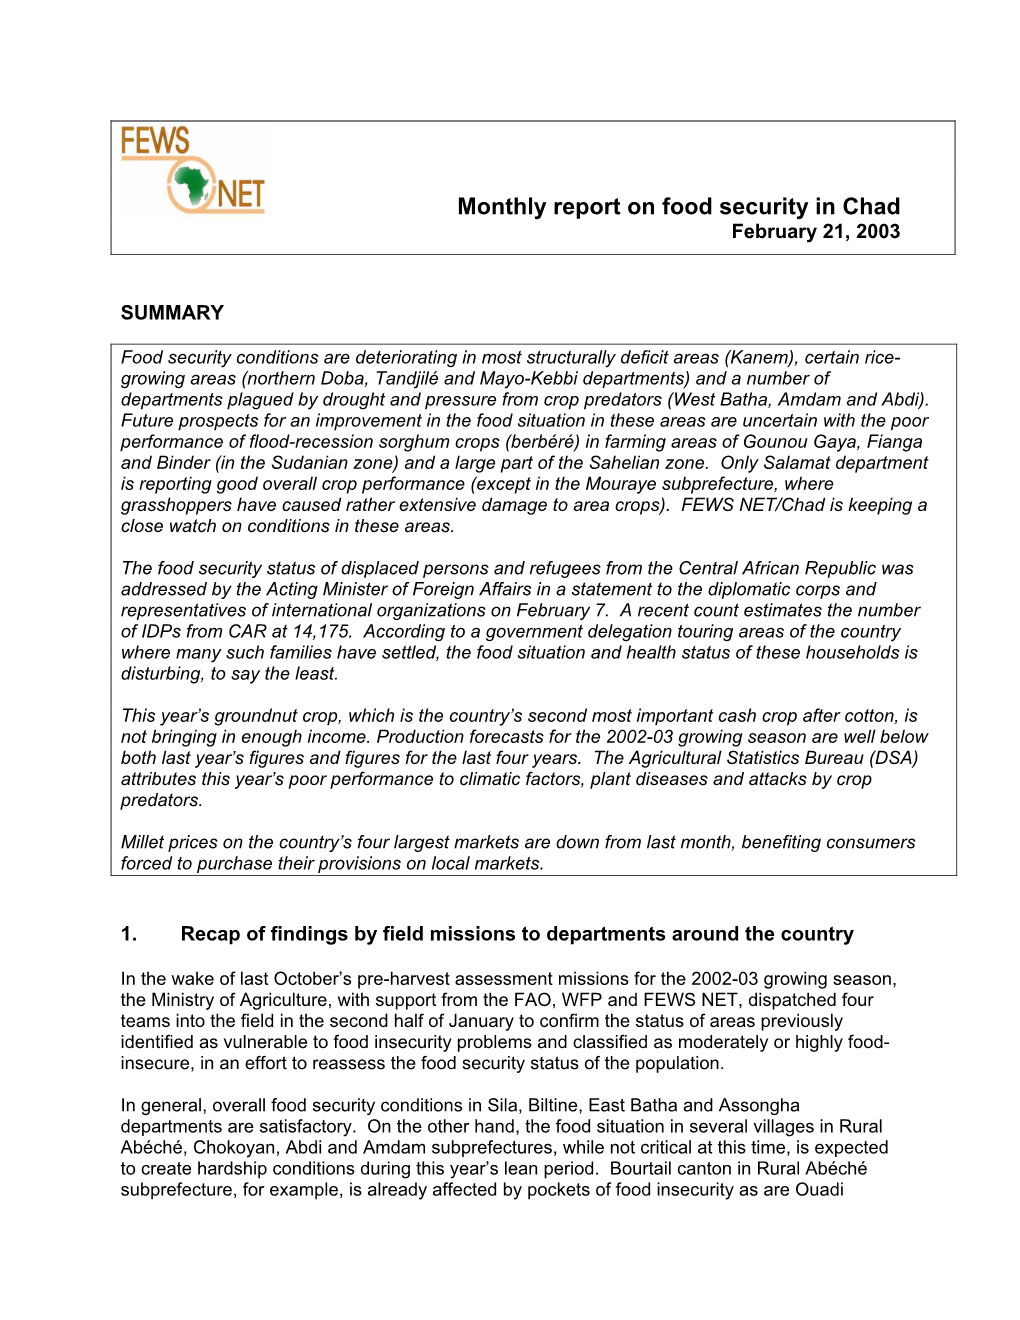 Monthly Report on Food Security in Chad February 21, 2003